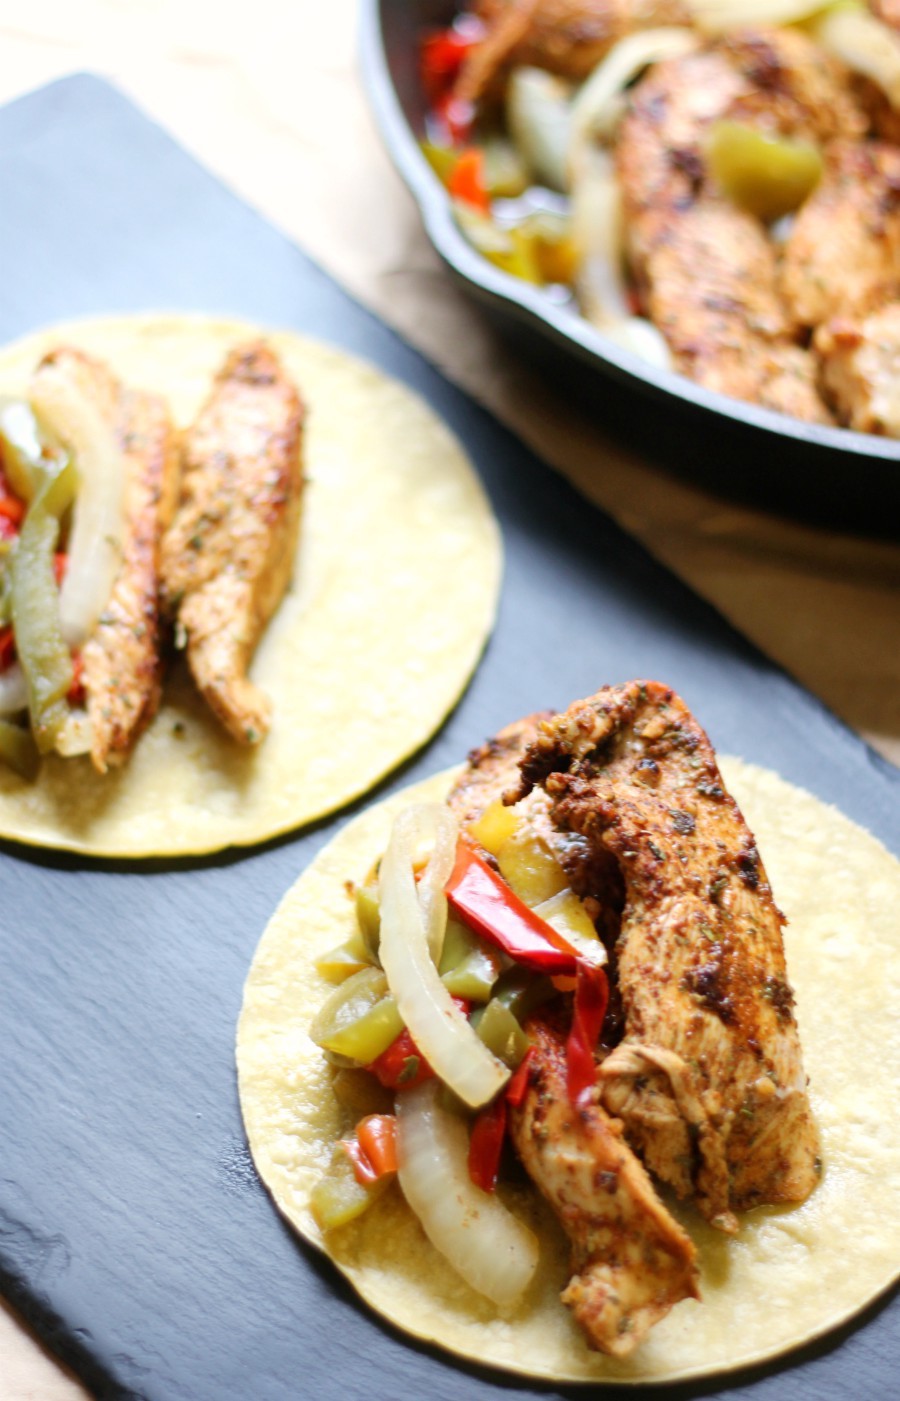 Easy Gluten-Free Skillet Chicken Fajitas (Allergy-Free, Paleo) | Strength and Sunshine @RebeccaGF666 Delicious and easy Gluten-Free Skillet Chicken Fajitas, healthy and baked in the oven. Just sliced spiced rubbed chicken, bell peppers, and onions! An allergy-free and paleo Tex-Mex recipe you can make for dinner or prep ahead of time for quick lunches and meals throughout the week!